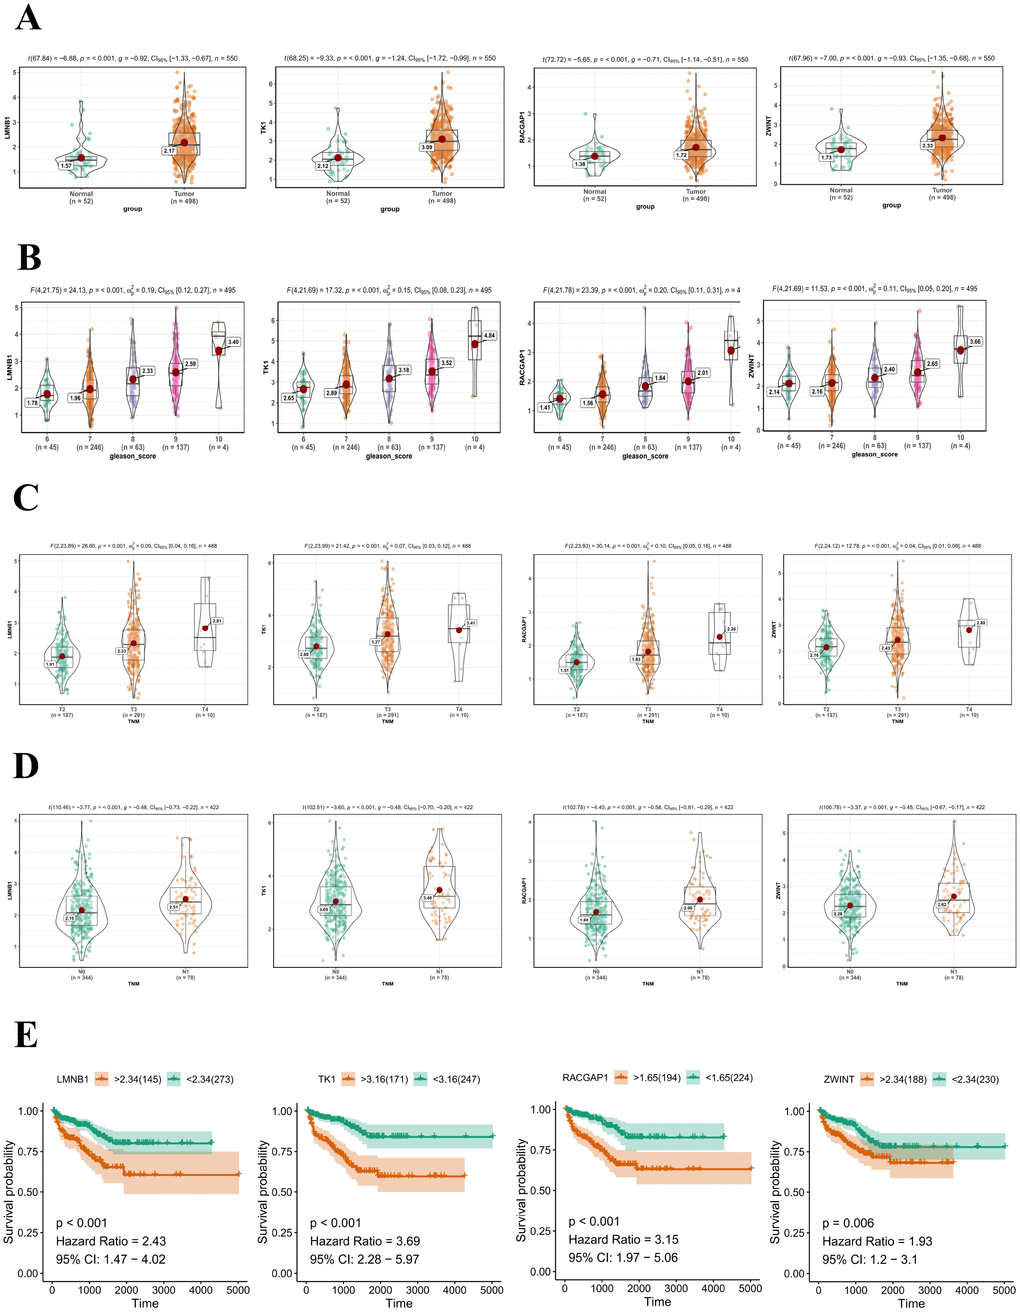 Validation of hub genes in the TCGA-PRAD dataset. (A) LMNB1, TK1, RACGAP1, and ZWINT gene expression differences between PCa and adjacent normal tissues. (B) Expression of LMNB1, TK1, RACGAP1, and ZWINT in PCa samples with different Gleason scores. (C) Expression of LMNB1, TK1, RACGAP1, and ZWINT in PCa samples with different T stages. (D) Expression of LMNB1, TK1, RACGAP1, and ZWINT in PCa samples with different N stages. (E) Association between LMNB1, TK1, RACGAP1, and ZWINT expression and disease-free survival time in the TCGA-PRAD dataset. The yellow line indicates samples with highly expressed genes (above best-separation value), and the green line designates the samples with lowly expressed genes (below best-separation value). T, Tumor; N, Node.